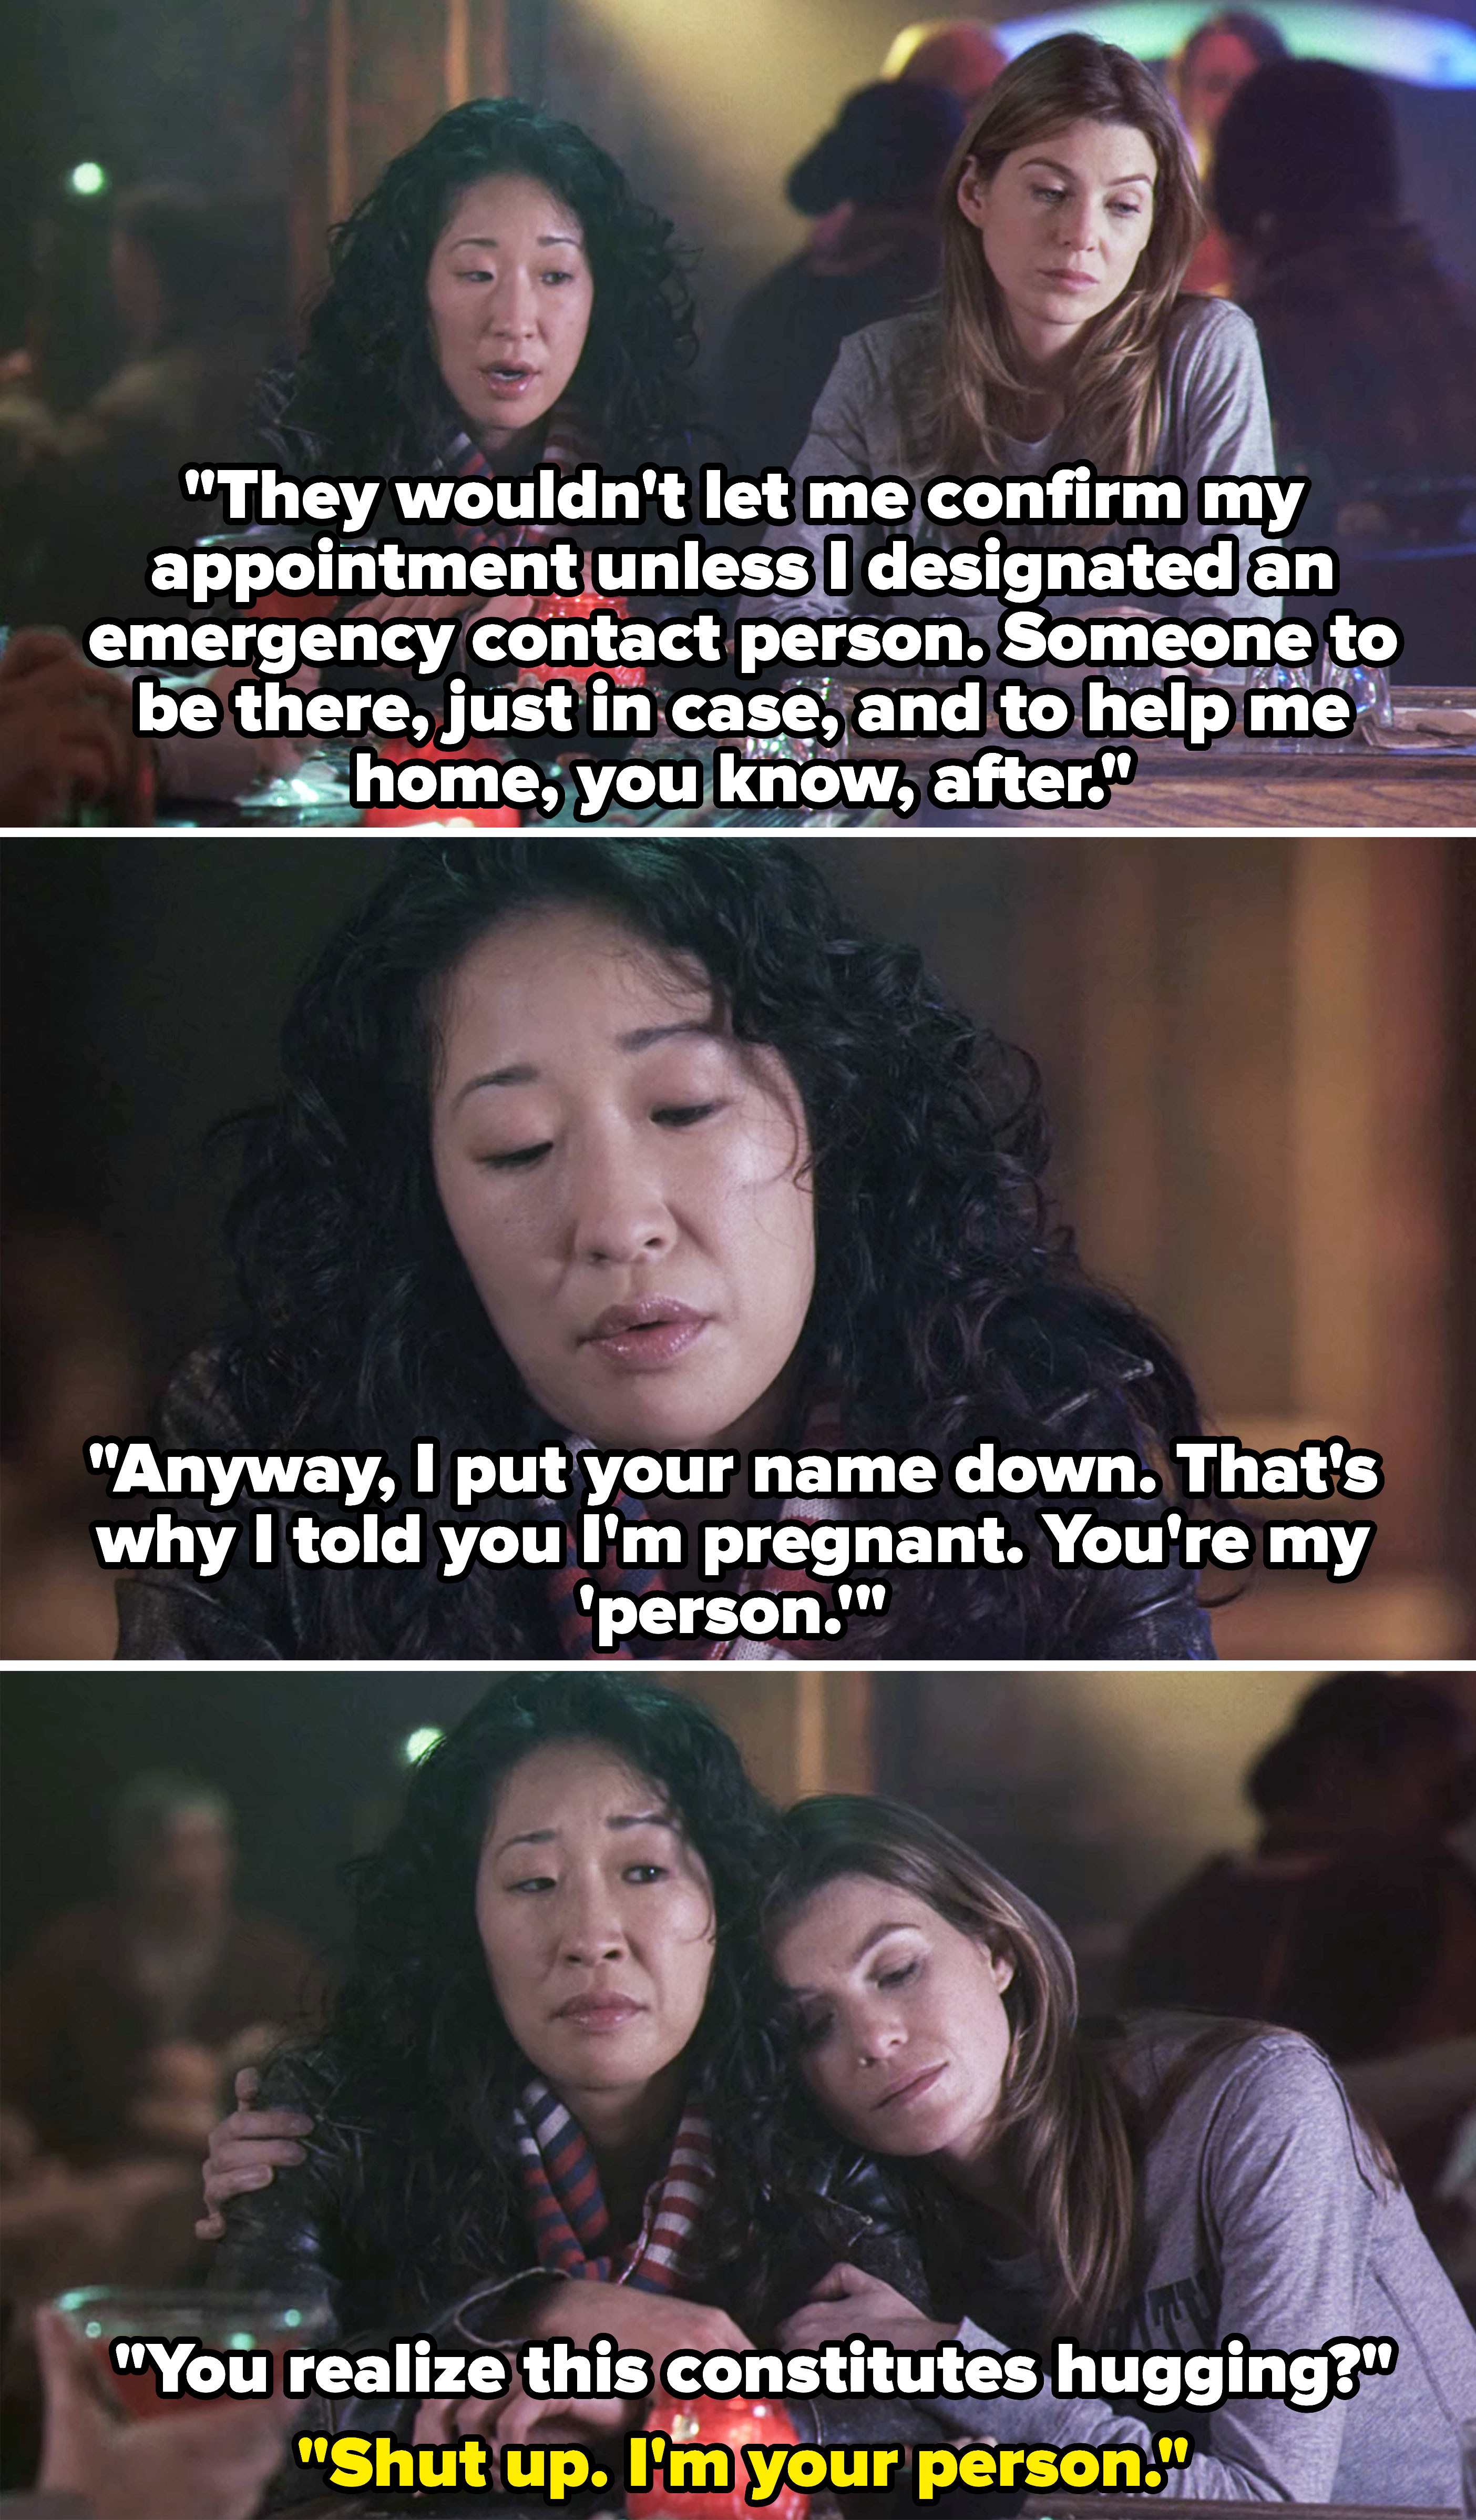 Christina Yang and Meredith having a heart-to-heart conversation about Christina being pregnant